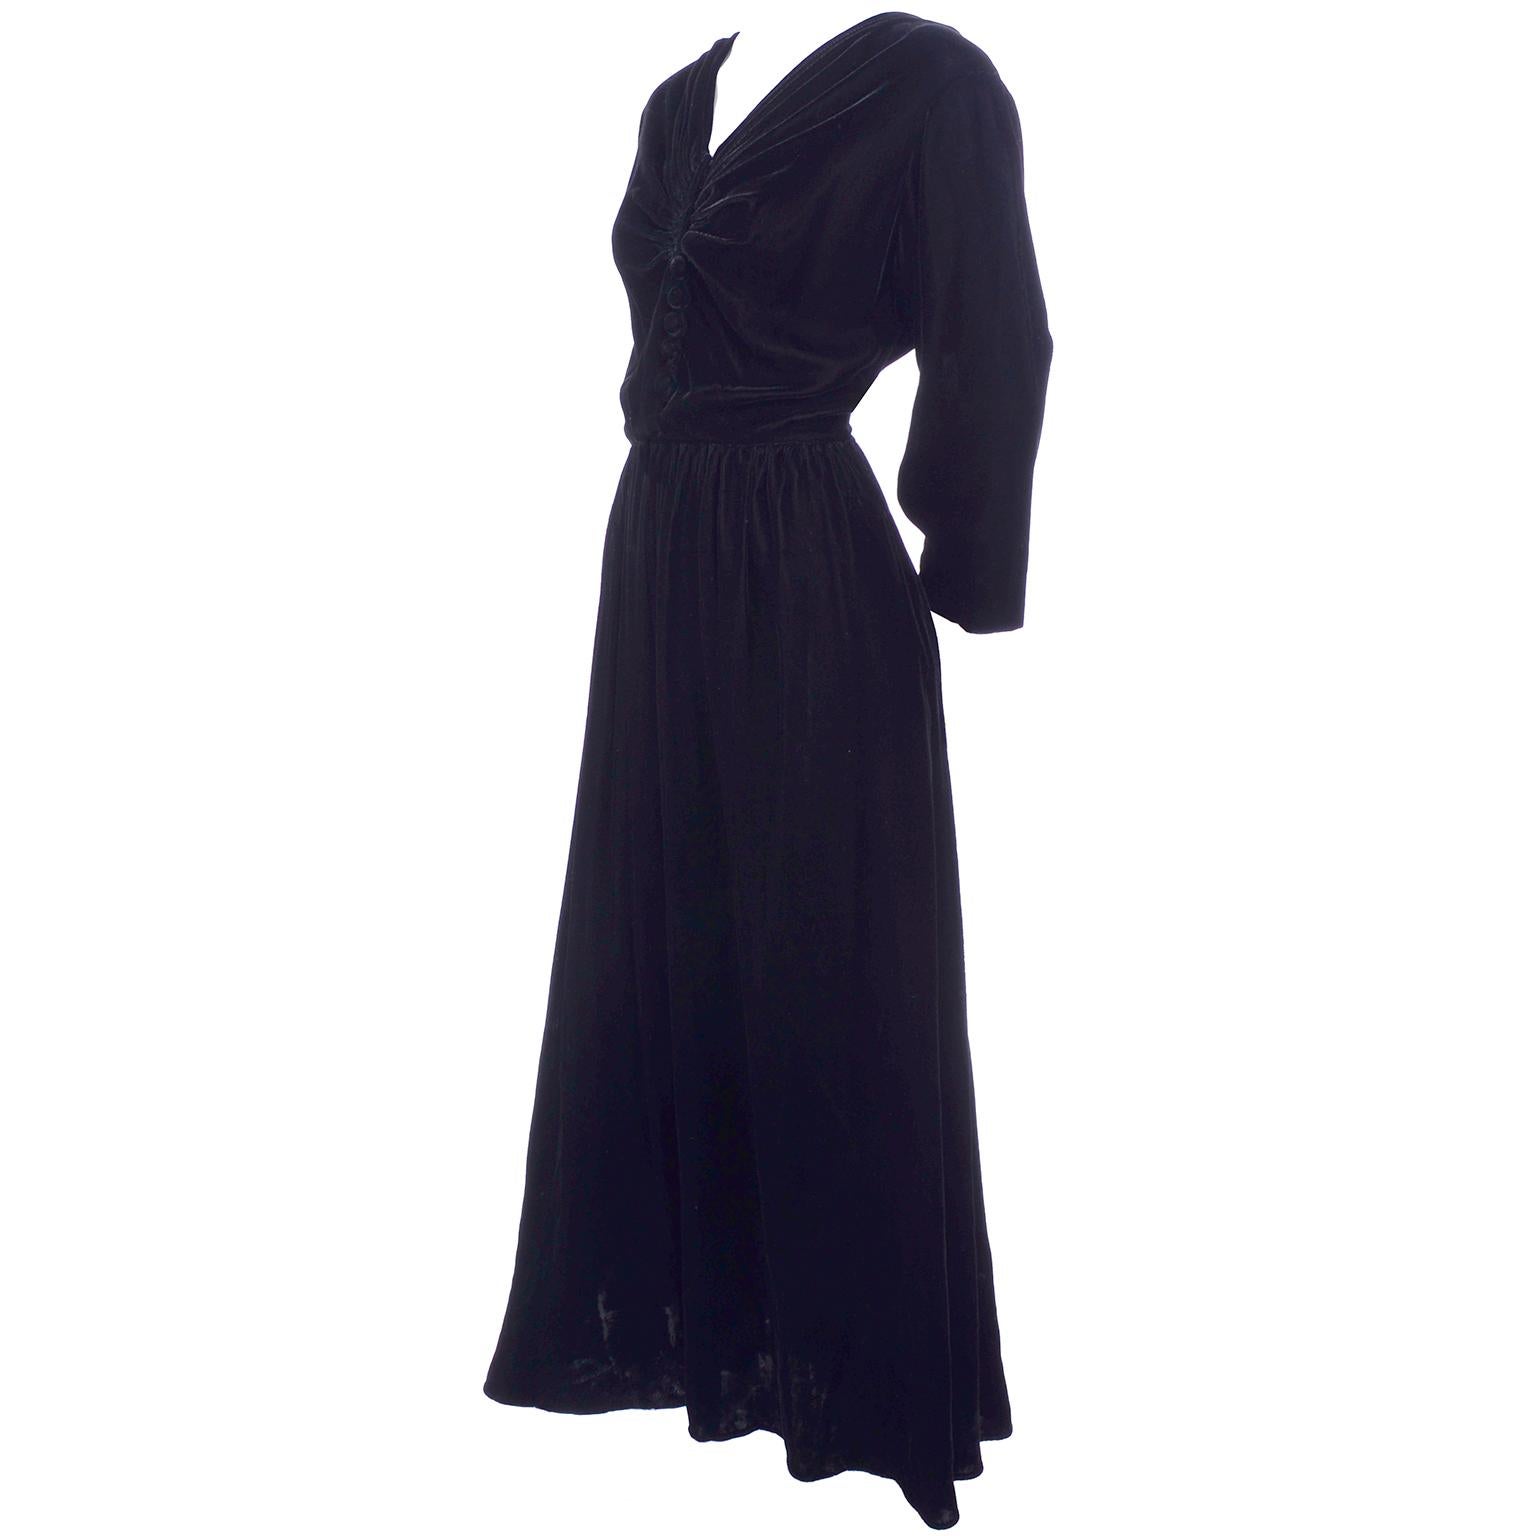 Vintage 1940s Black Velvet Evening Dress or Hostess Gown In Good Condition For Sale In Portland, OR